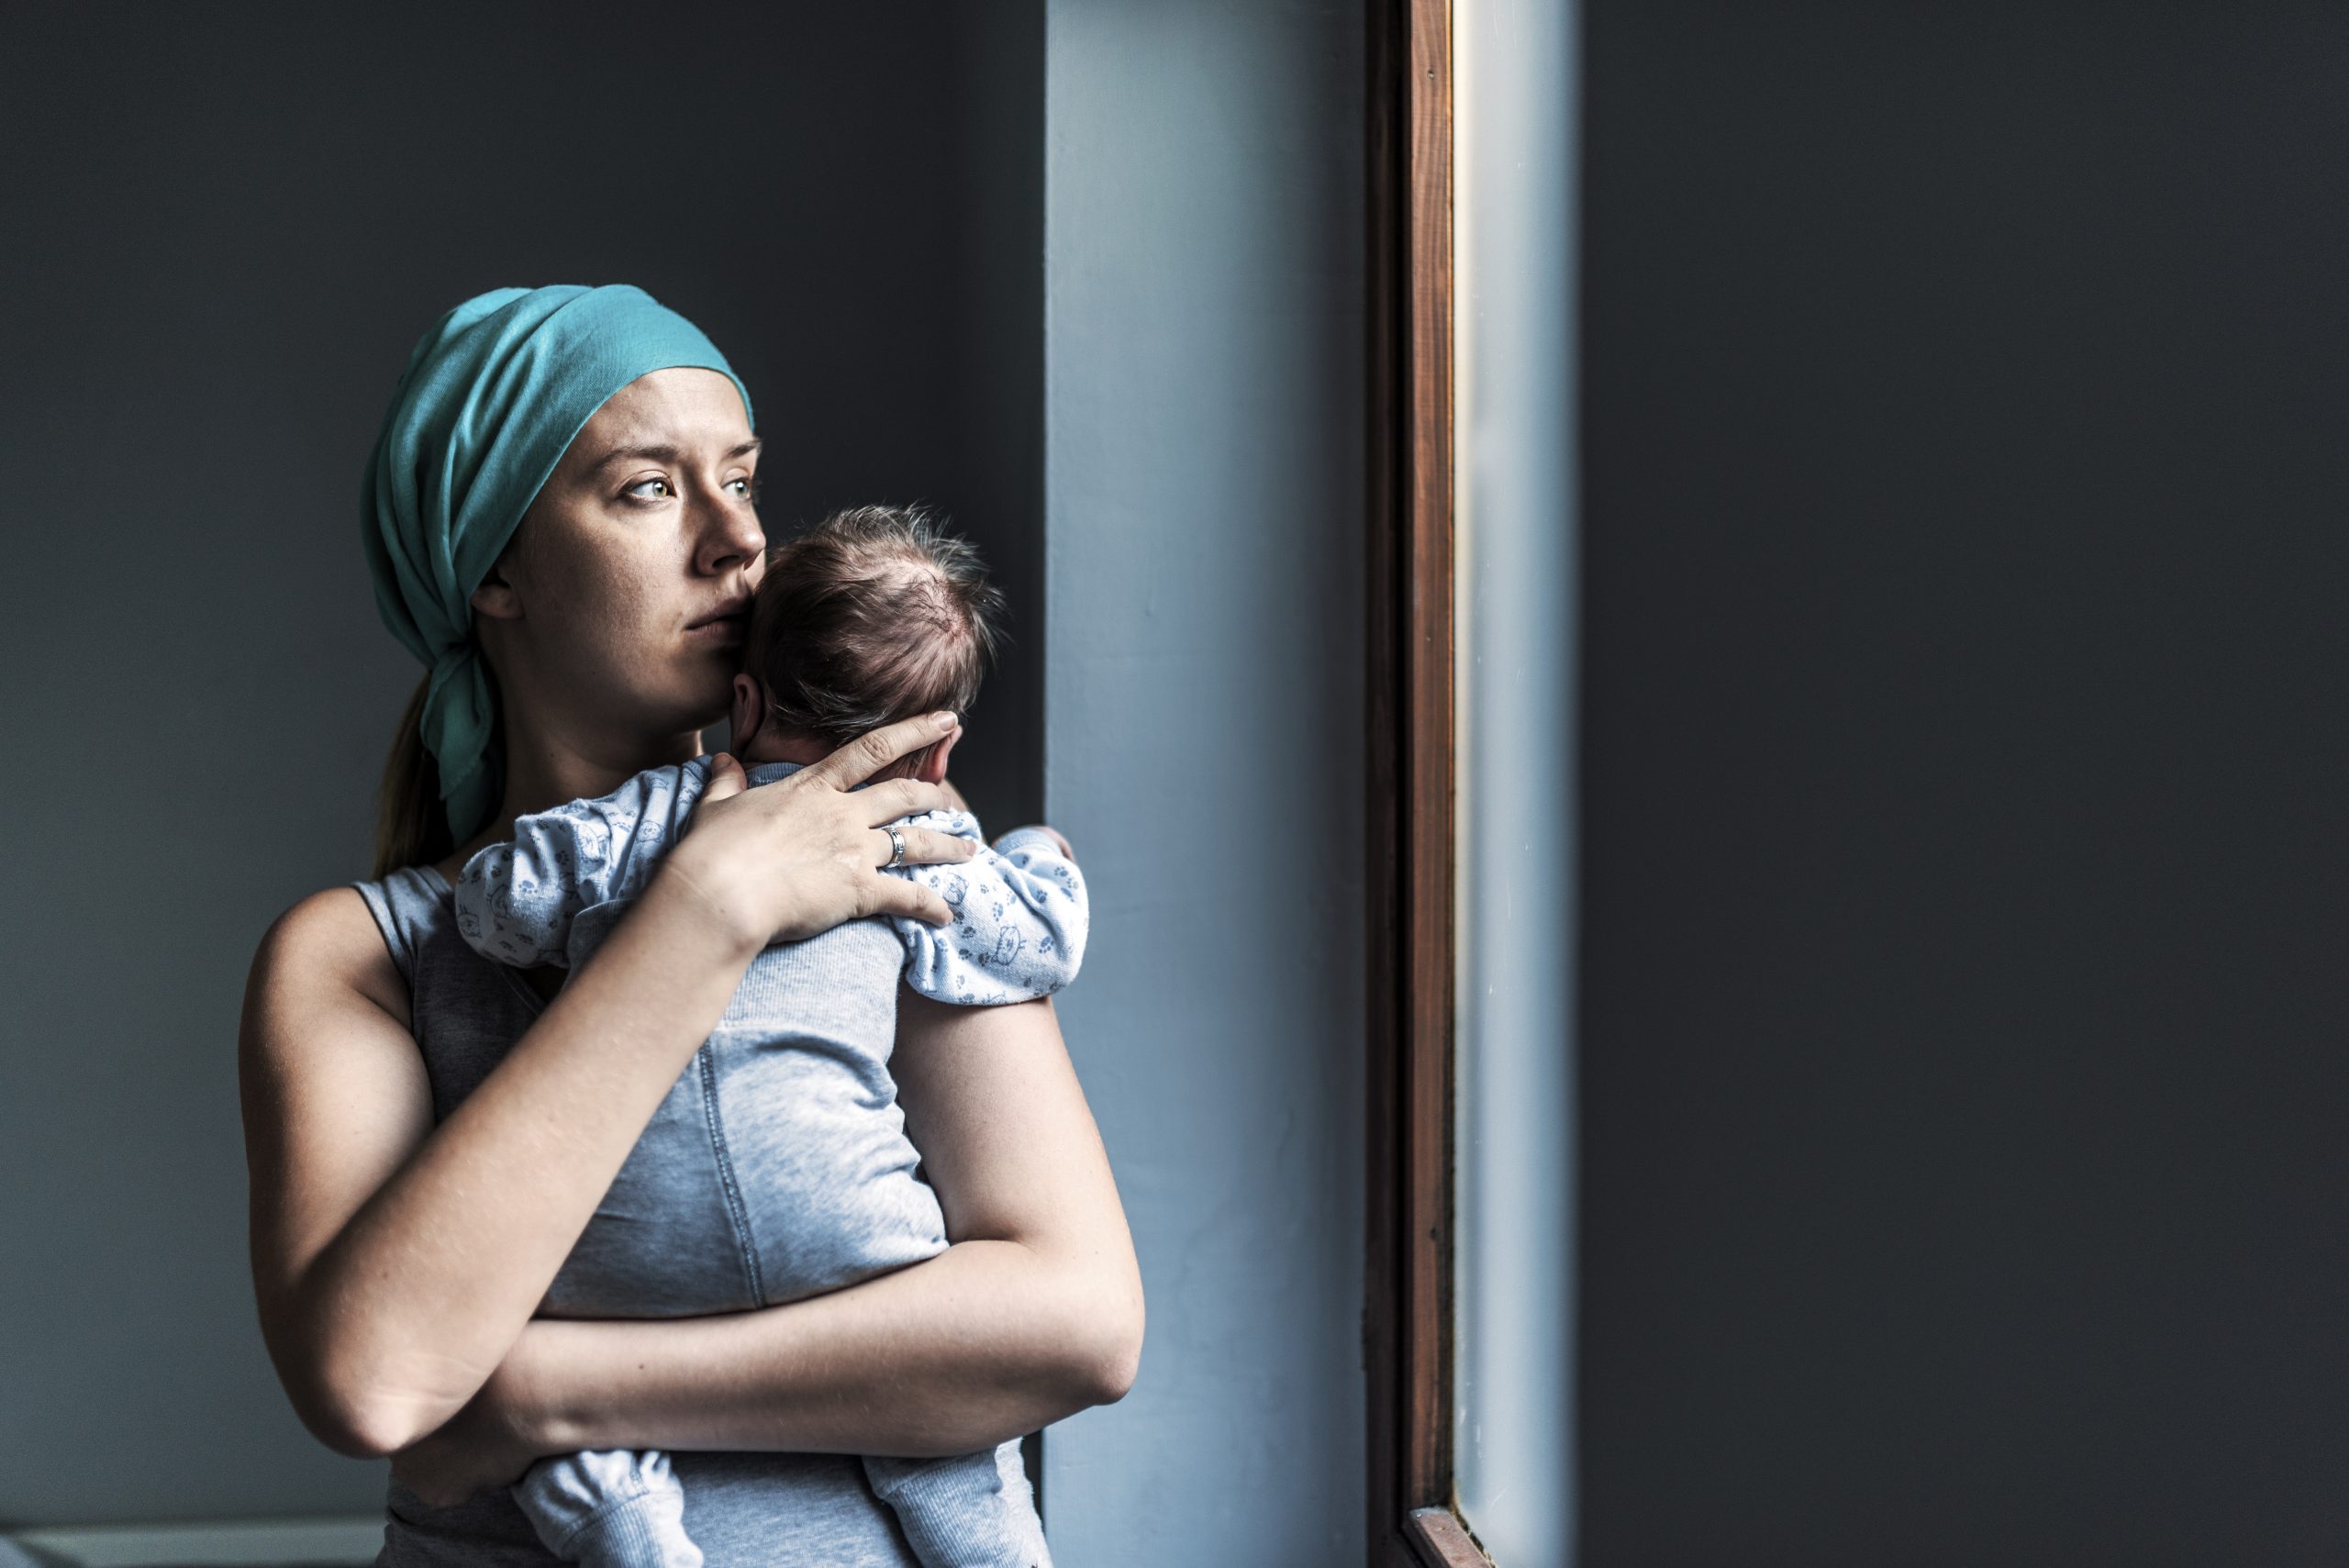 Caucasian Pensive Woman in headscarf, fighting breast cancer while holding her newborn baby relaxing in cancer treatment hospital, patient standing next to hospital window. Mother and baby son. Sleepy little child with serious mom.